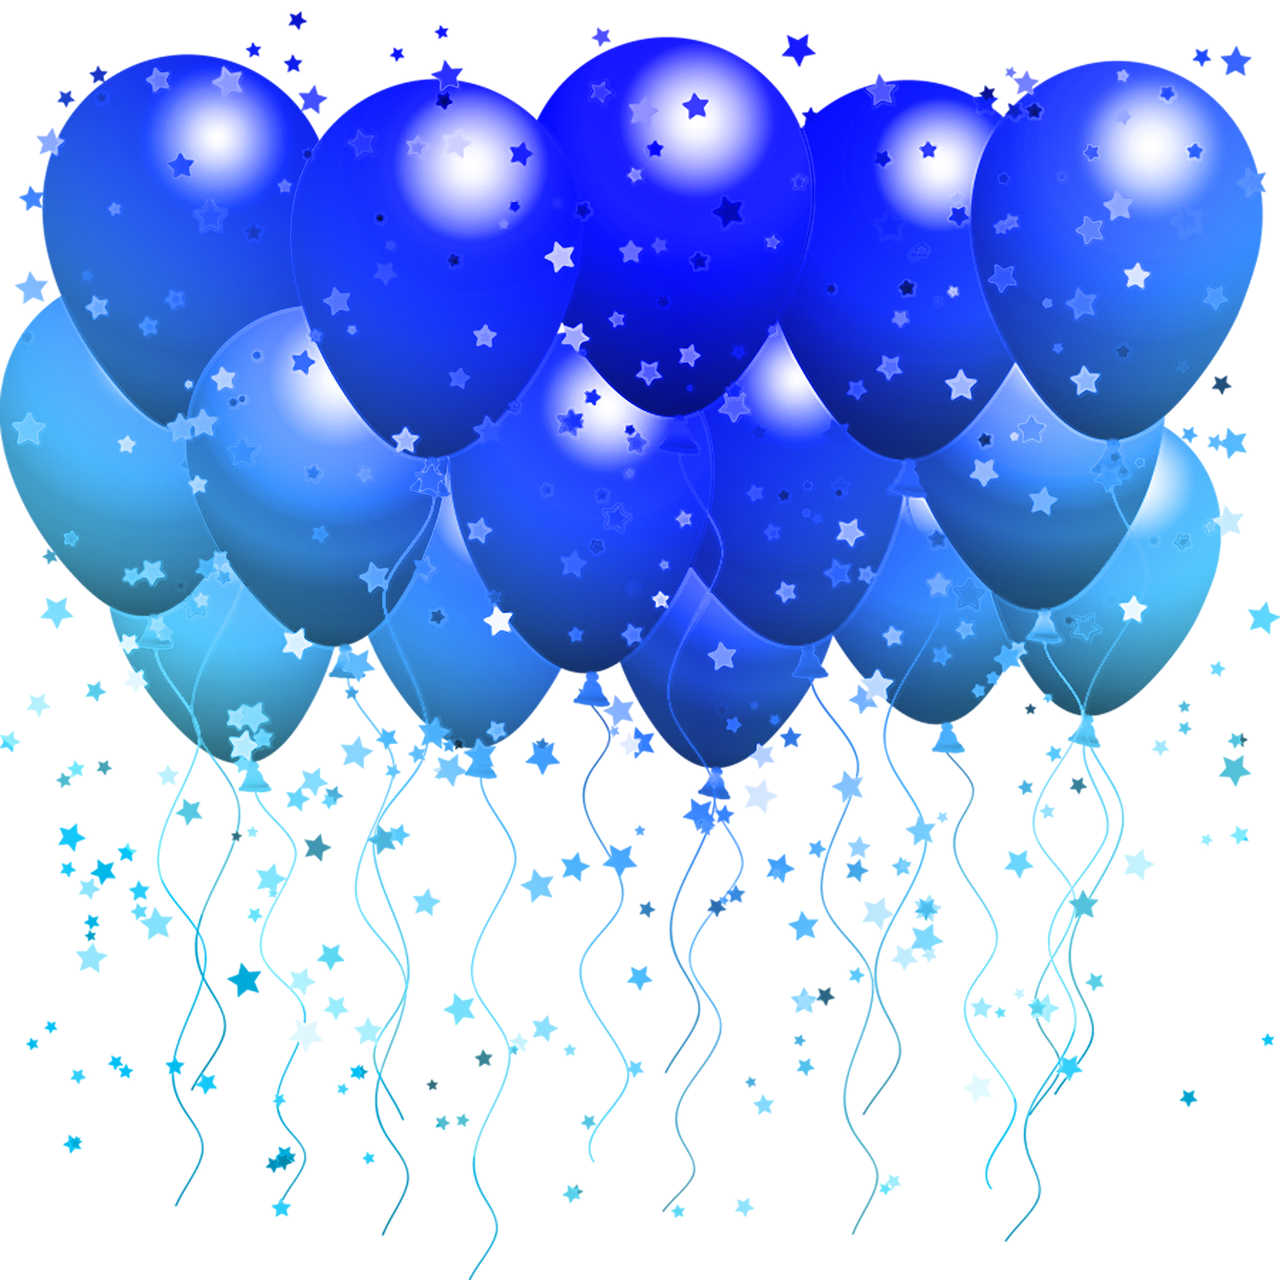 Download free photo of Balloons, blue balloons, streamers, balloon dog ...